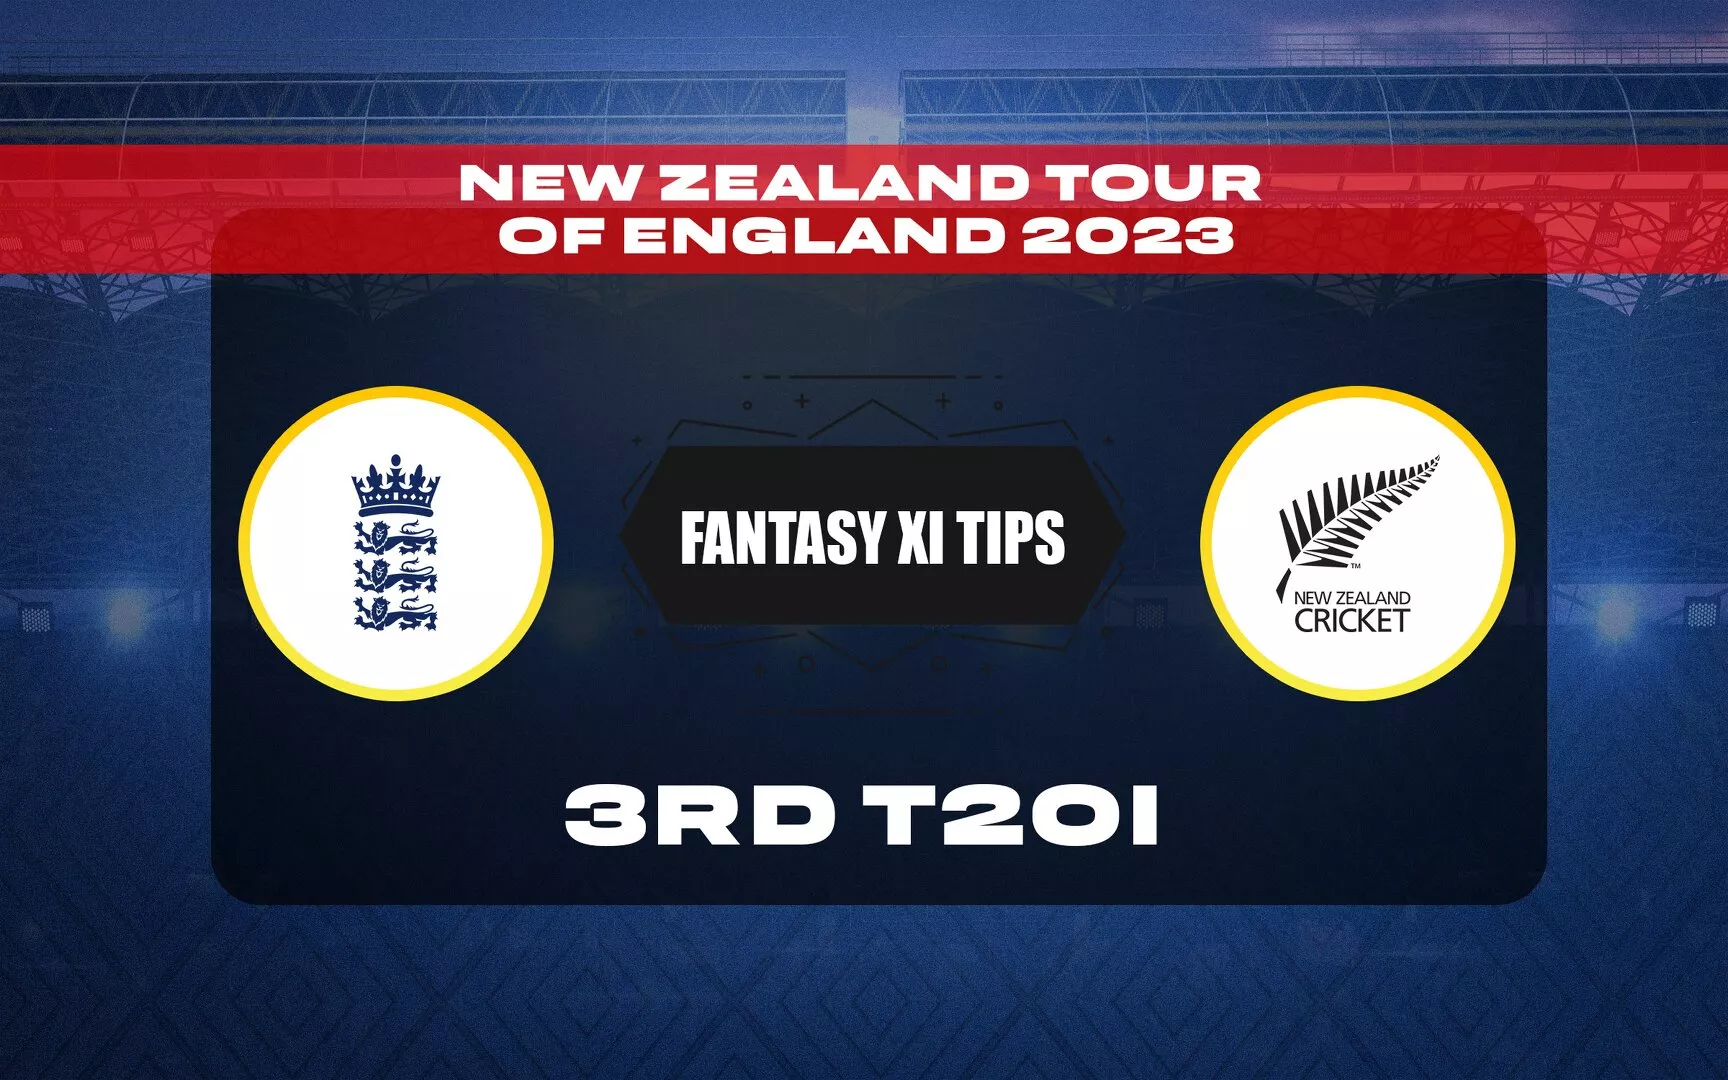 ENG vs NZ Dream11 Prediction, Dream11 Playing XI, Today 3rd T20I, New Zealand tour of England 2023